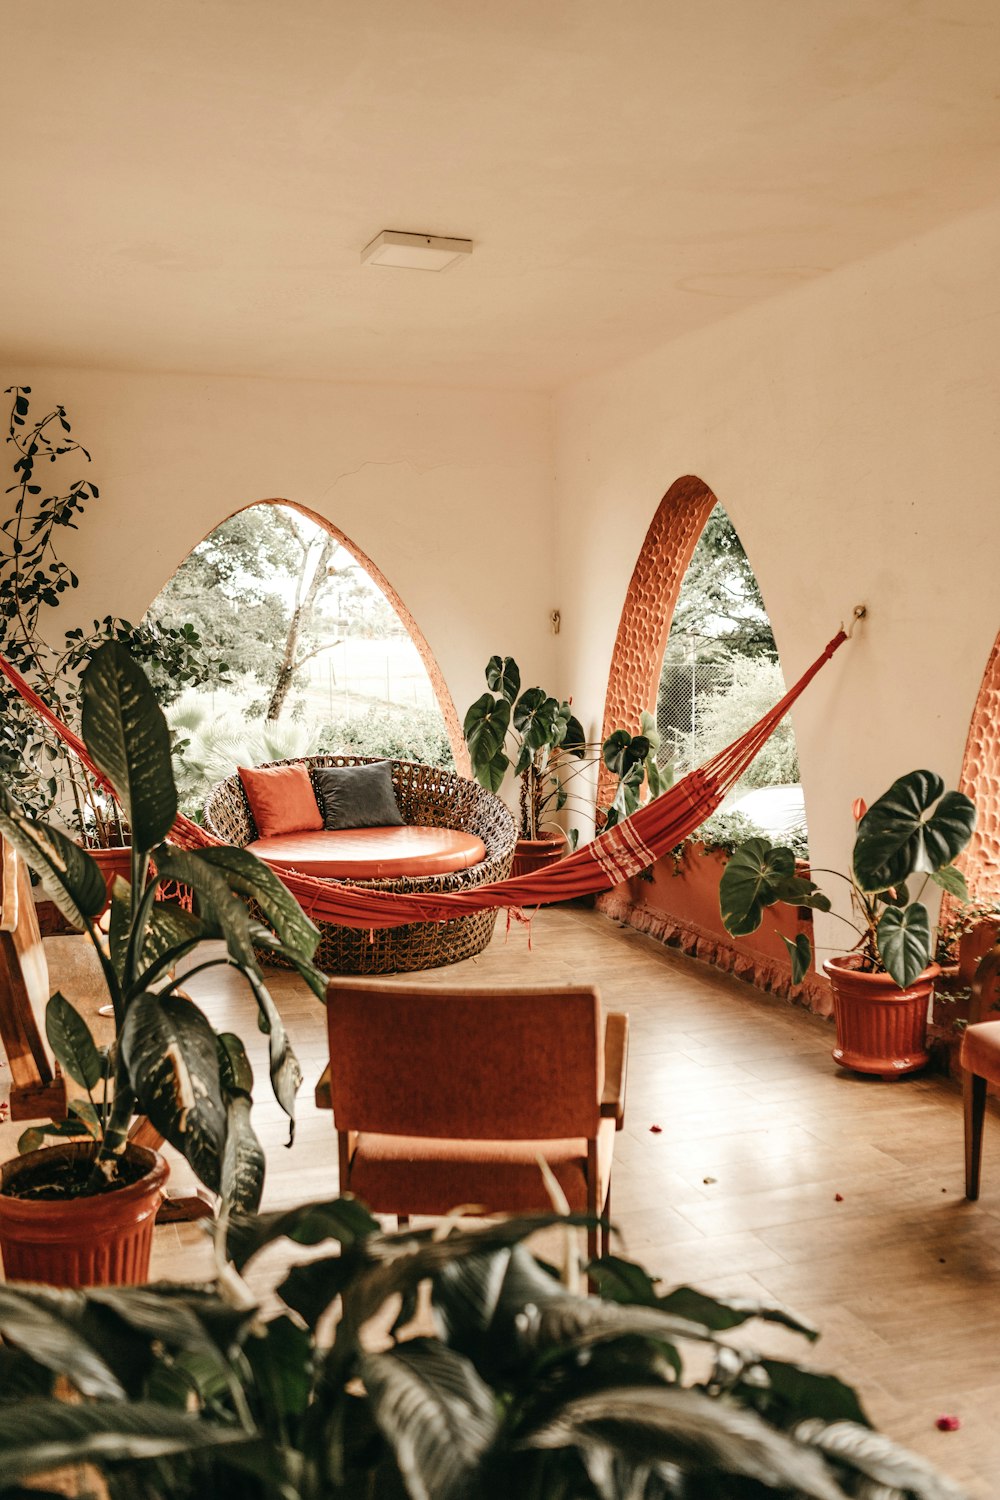 red hammock hanging in the living room